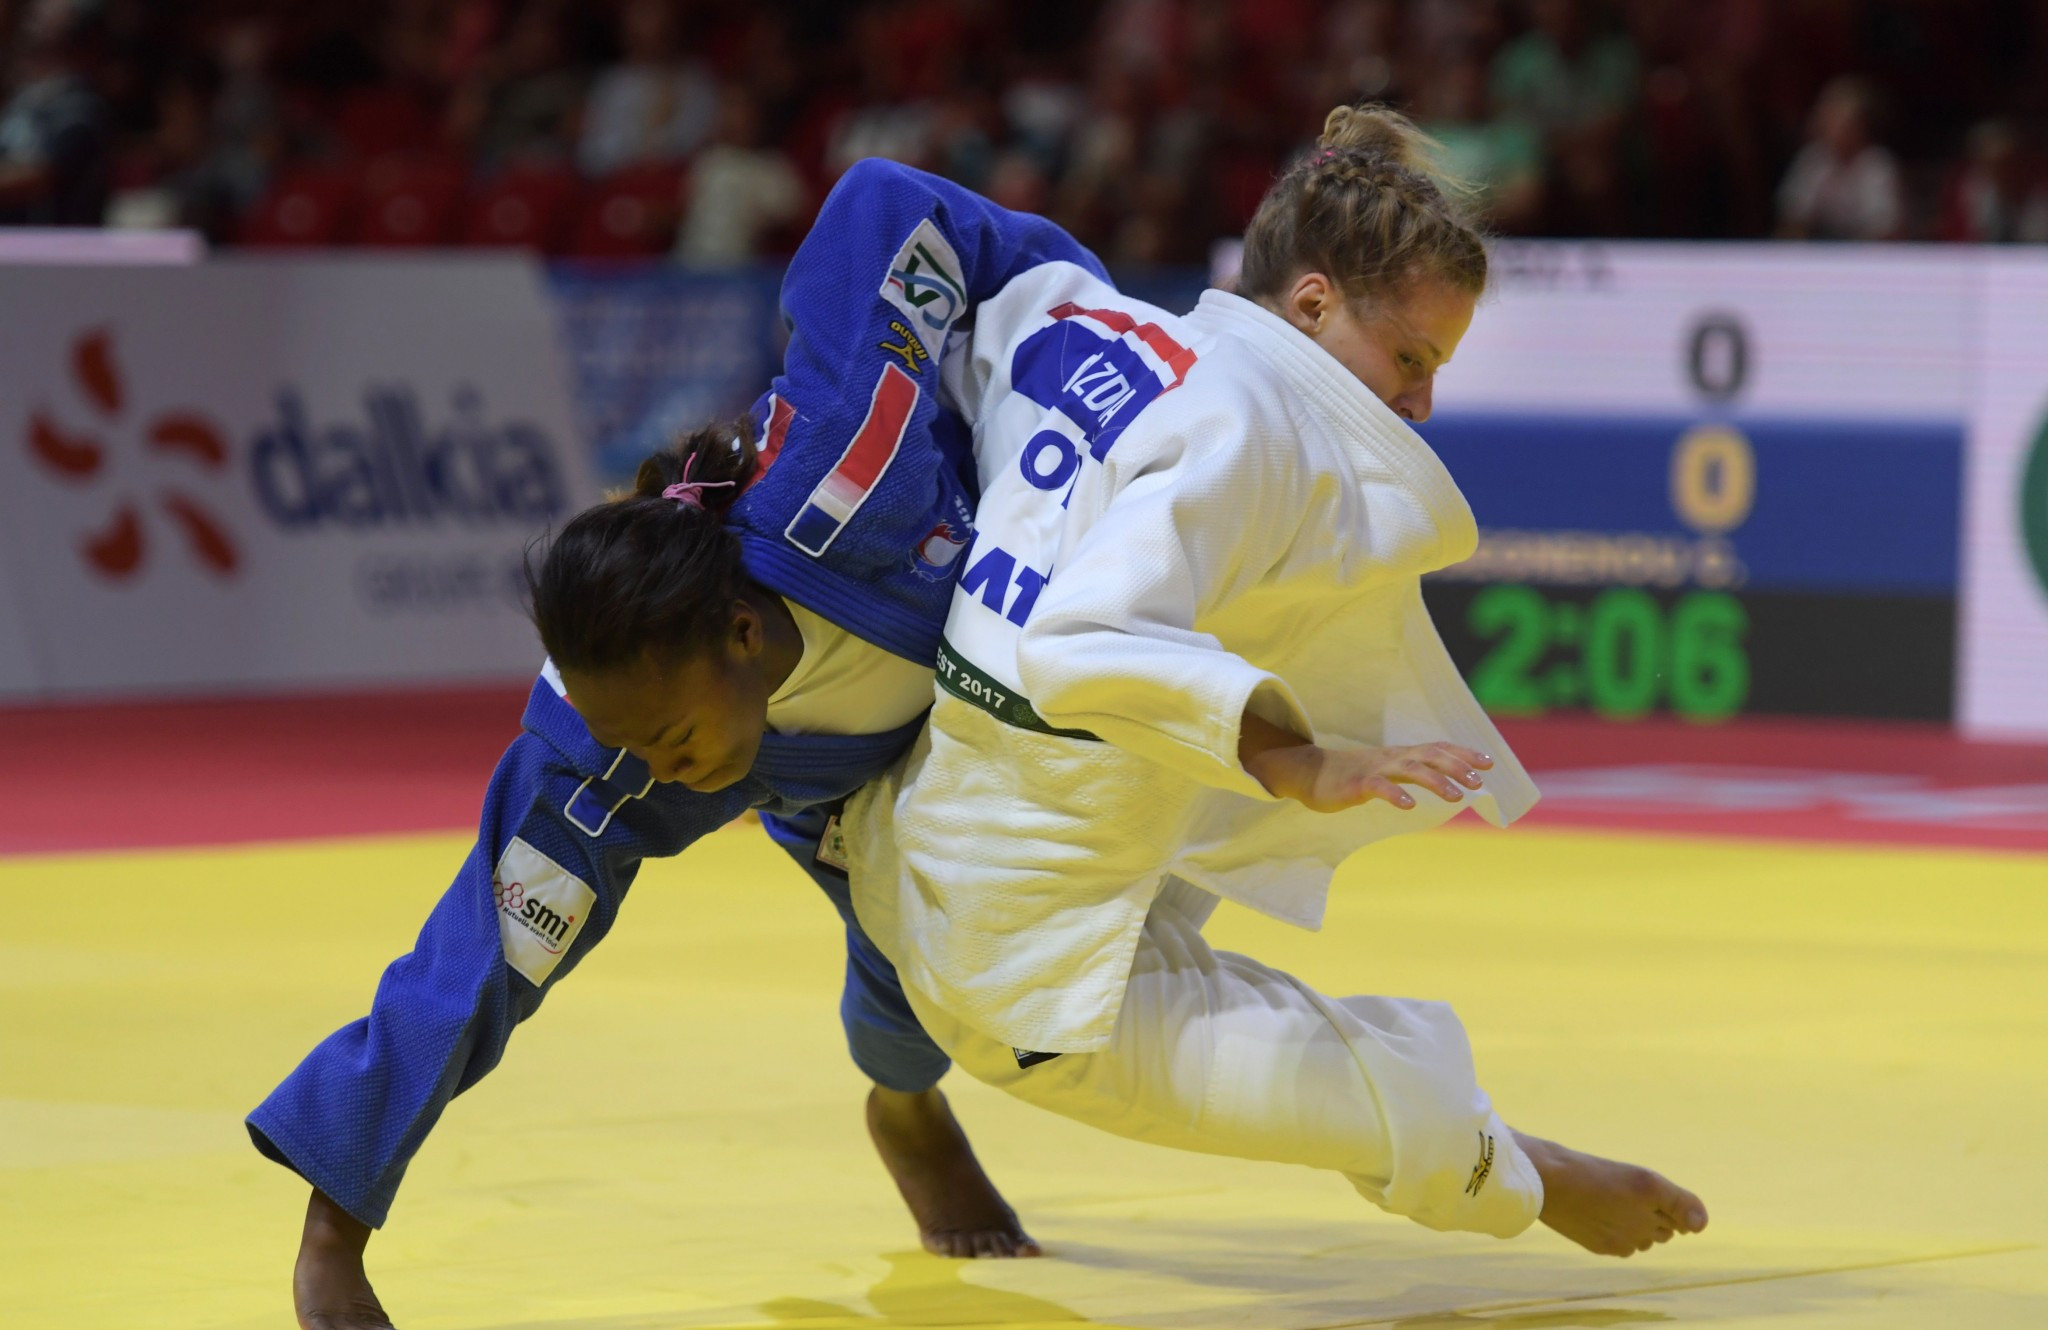 insidethegames reporting LIVE from the IJF World Championships in Budapest